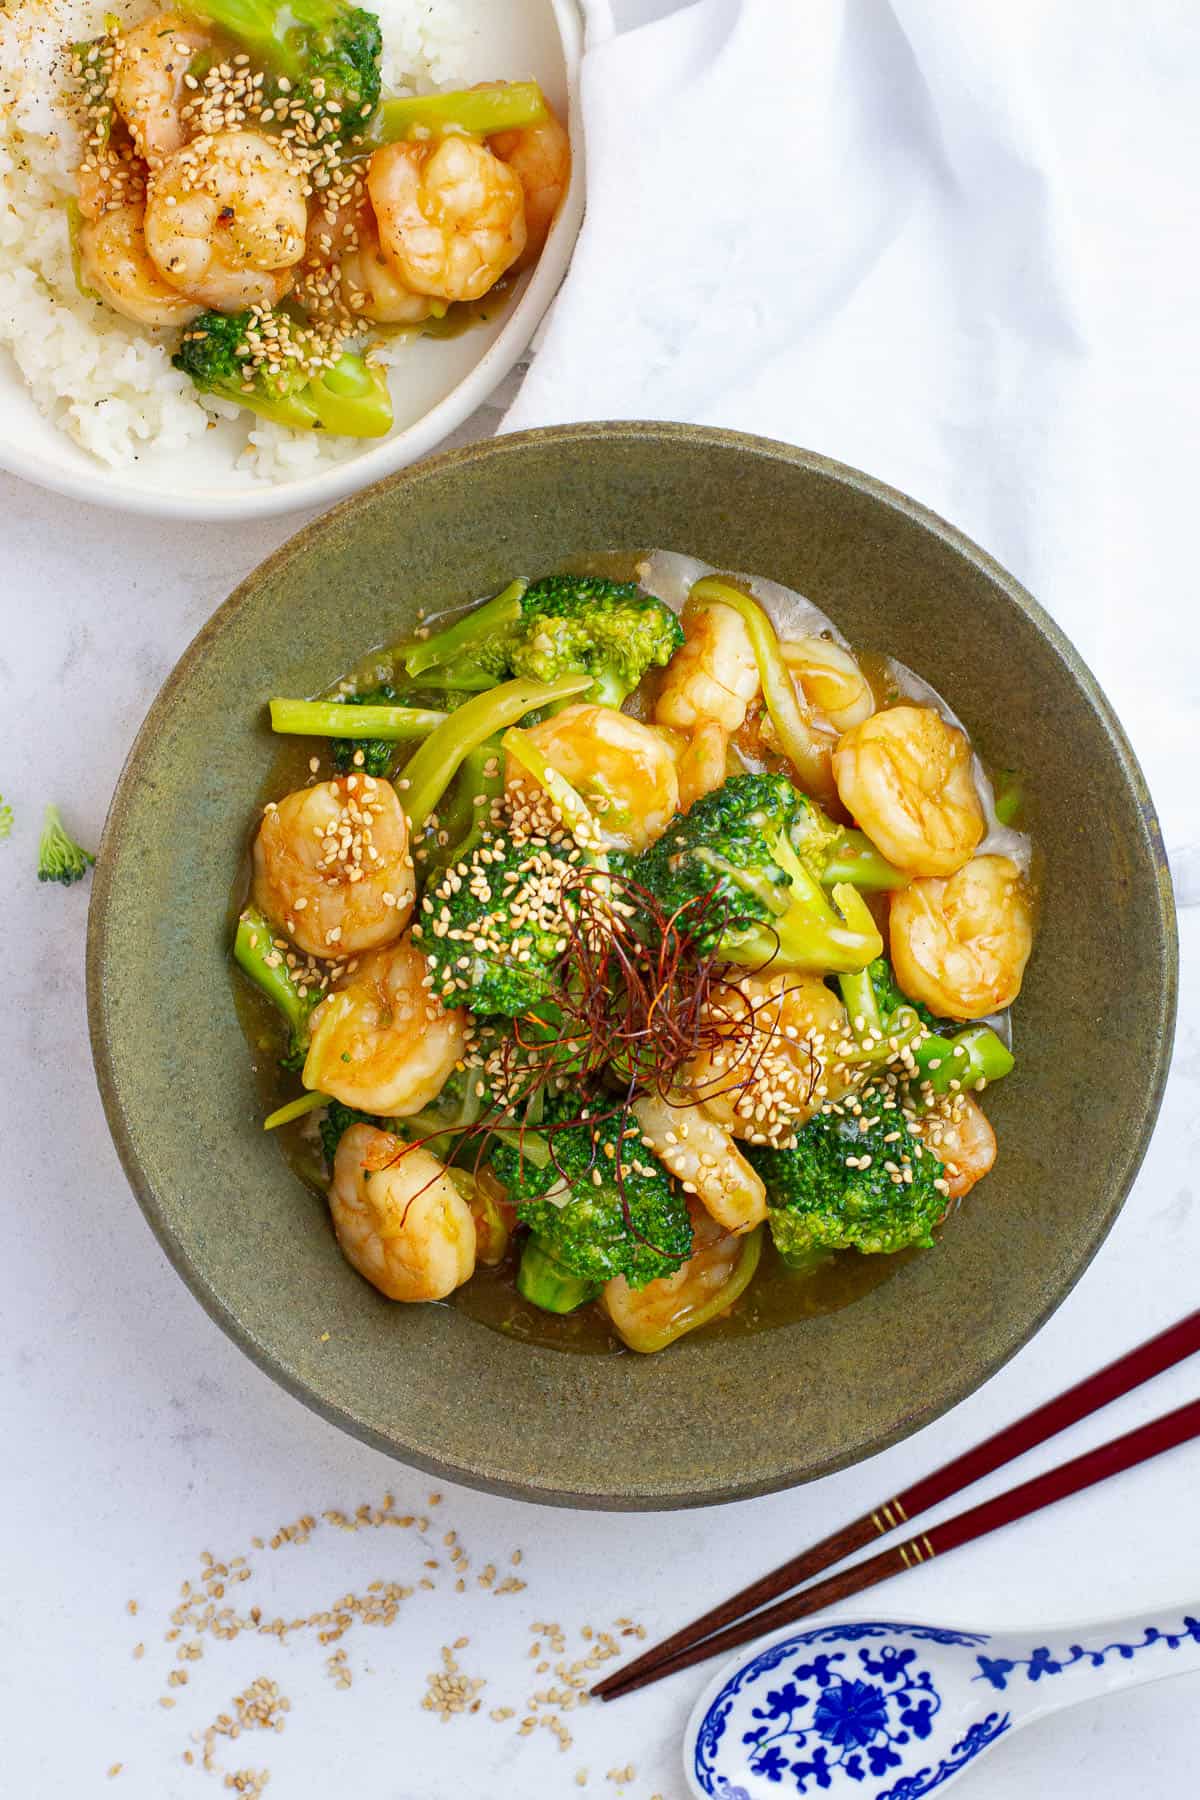 Top view of shrimp and broccoli.